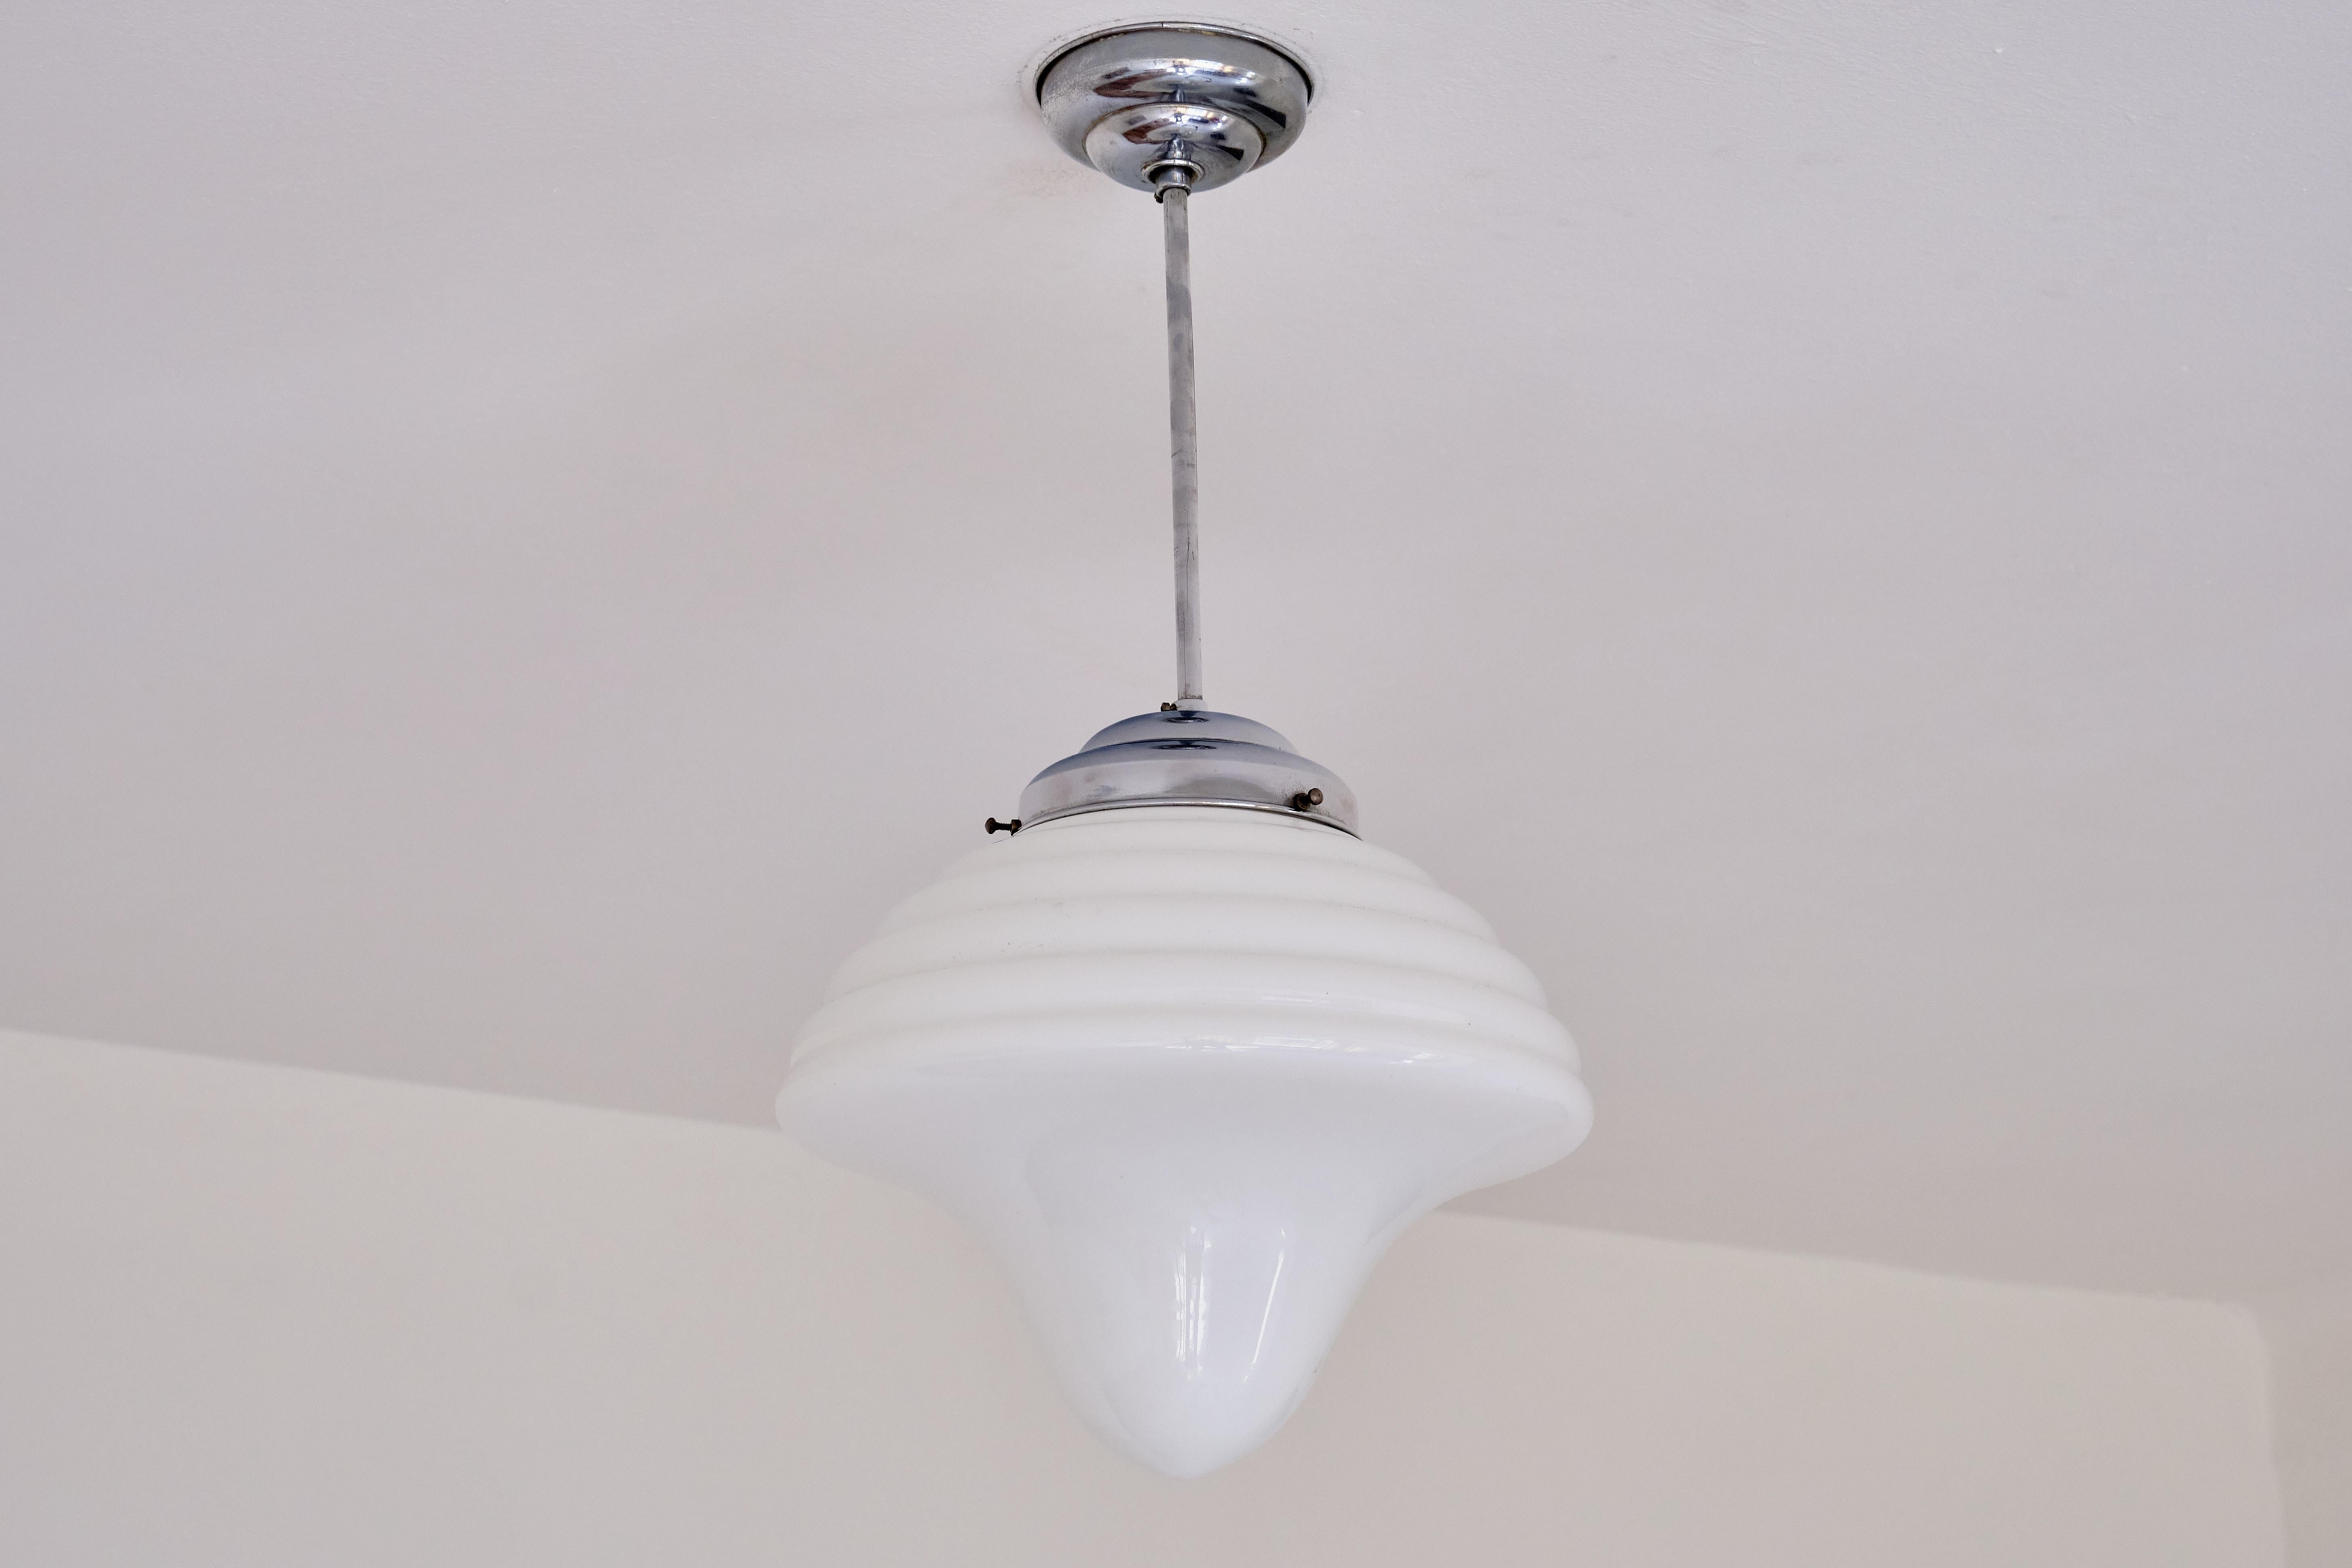 Opaline Glass Art Deco Drop Shaped Pendant Light in Opal Glass and Nickel, Netherlands, 1930s For Sale